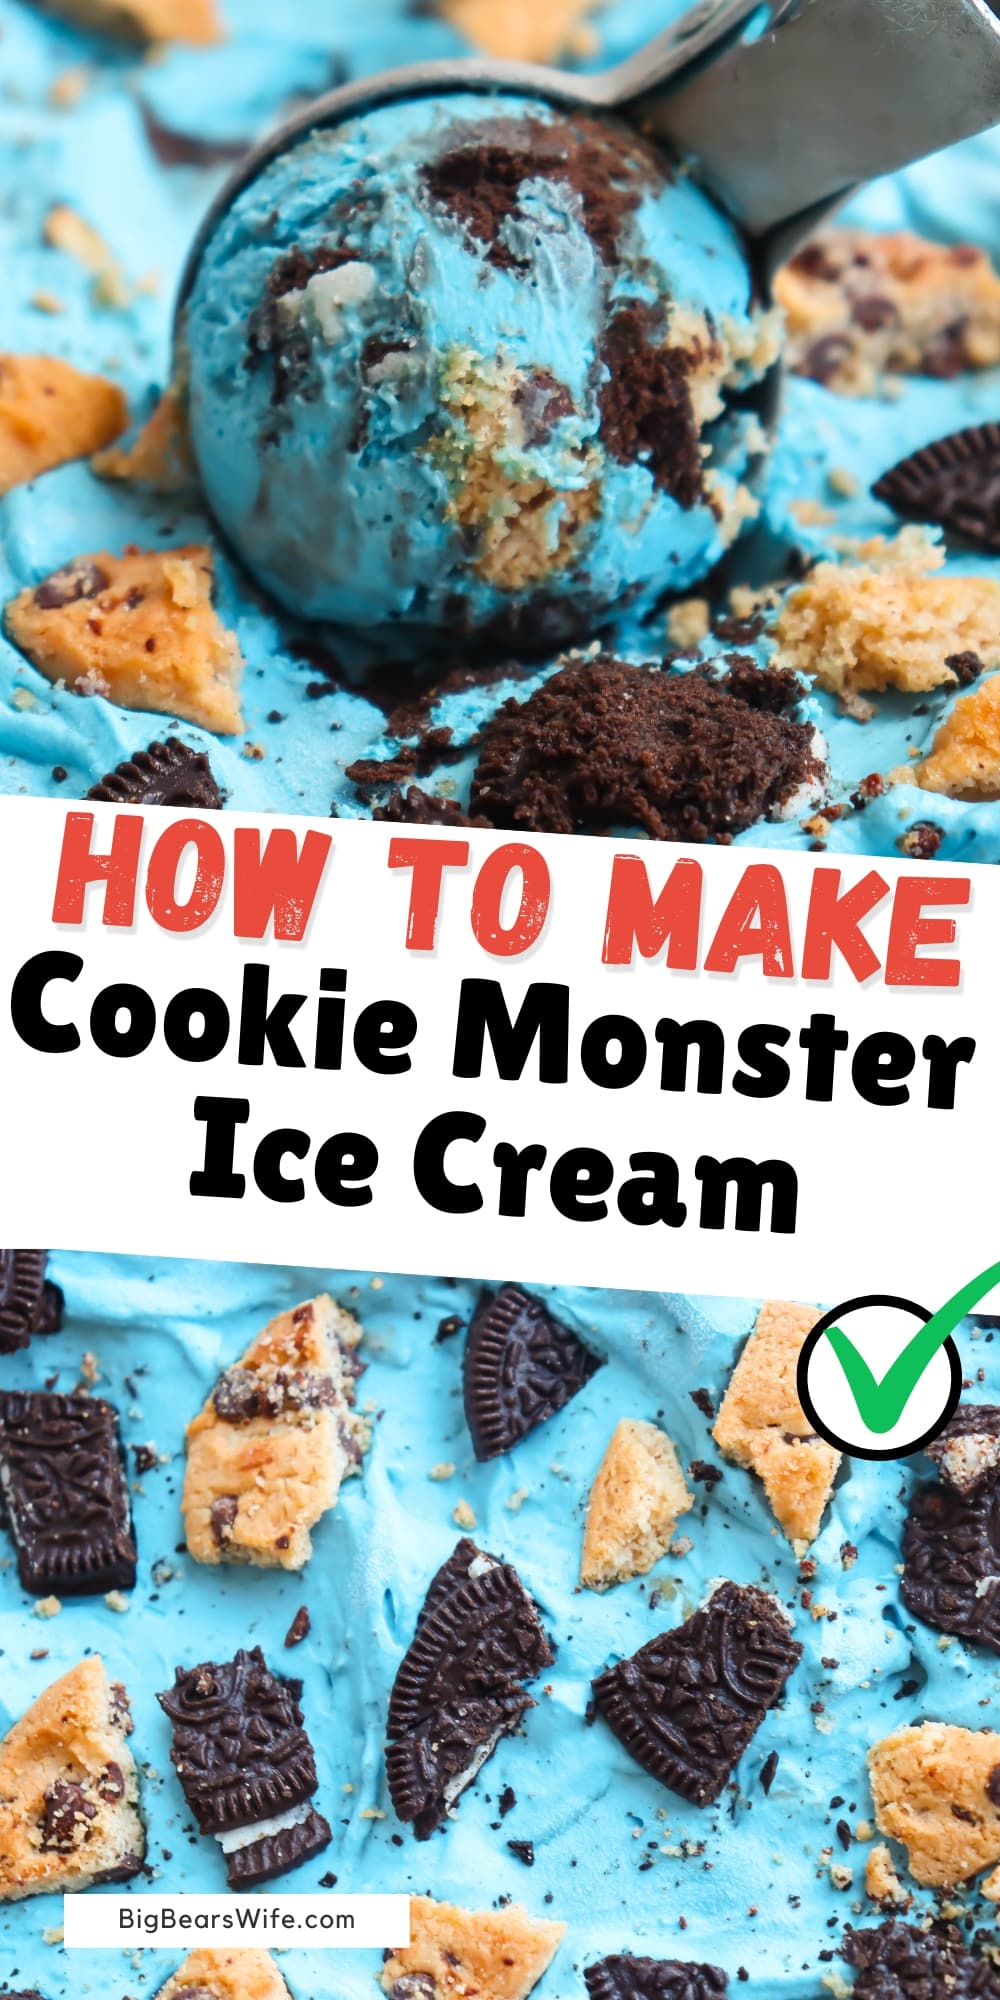 Take your ice cream experience to the next level with Cookie Monster's favorite frozen delight, Cookie Monster Ice Cream. Dive into a world of vibrant blue ice cream with swirls of cookie crumbs, perfectly capturing the essence of everyone's beloved Sesame Street character. Learn how to recreate this whimsical treat at home and surprise your friends and family with a dessert that is as delightful to look at as it is to eat. Get ready to unleash the inner child in you! via @bigbearswife